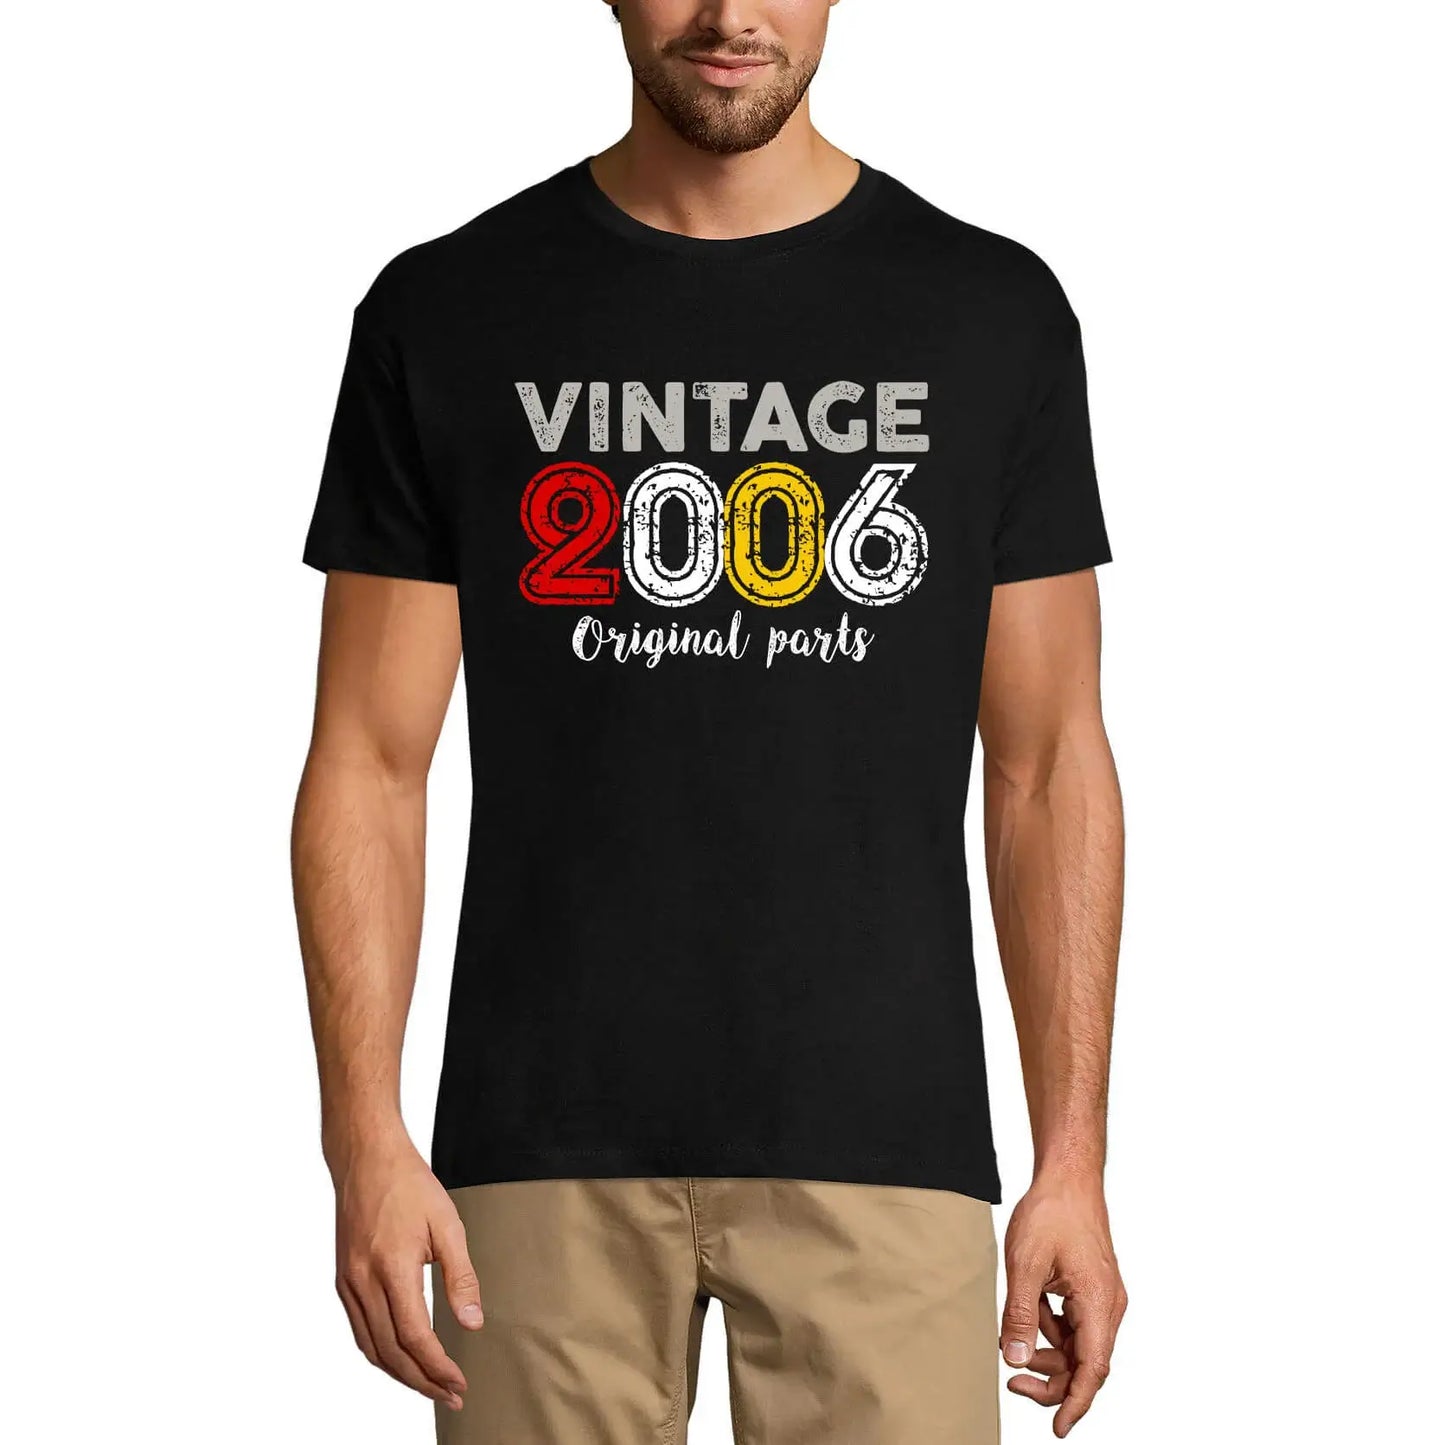 Men's Graphic T-Shirt Original Parts 2006 18th Birthday Anniversary 18 Year Old Gift 2006 Vintage Eco-Friendly Short Sleeve Novelty Tee